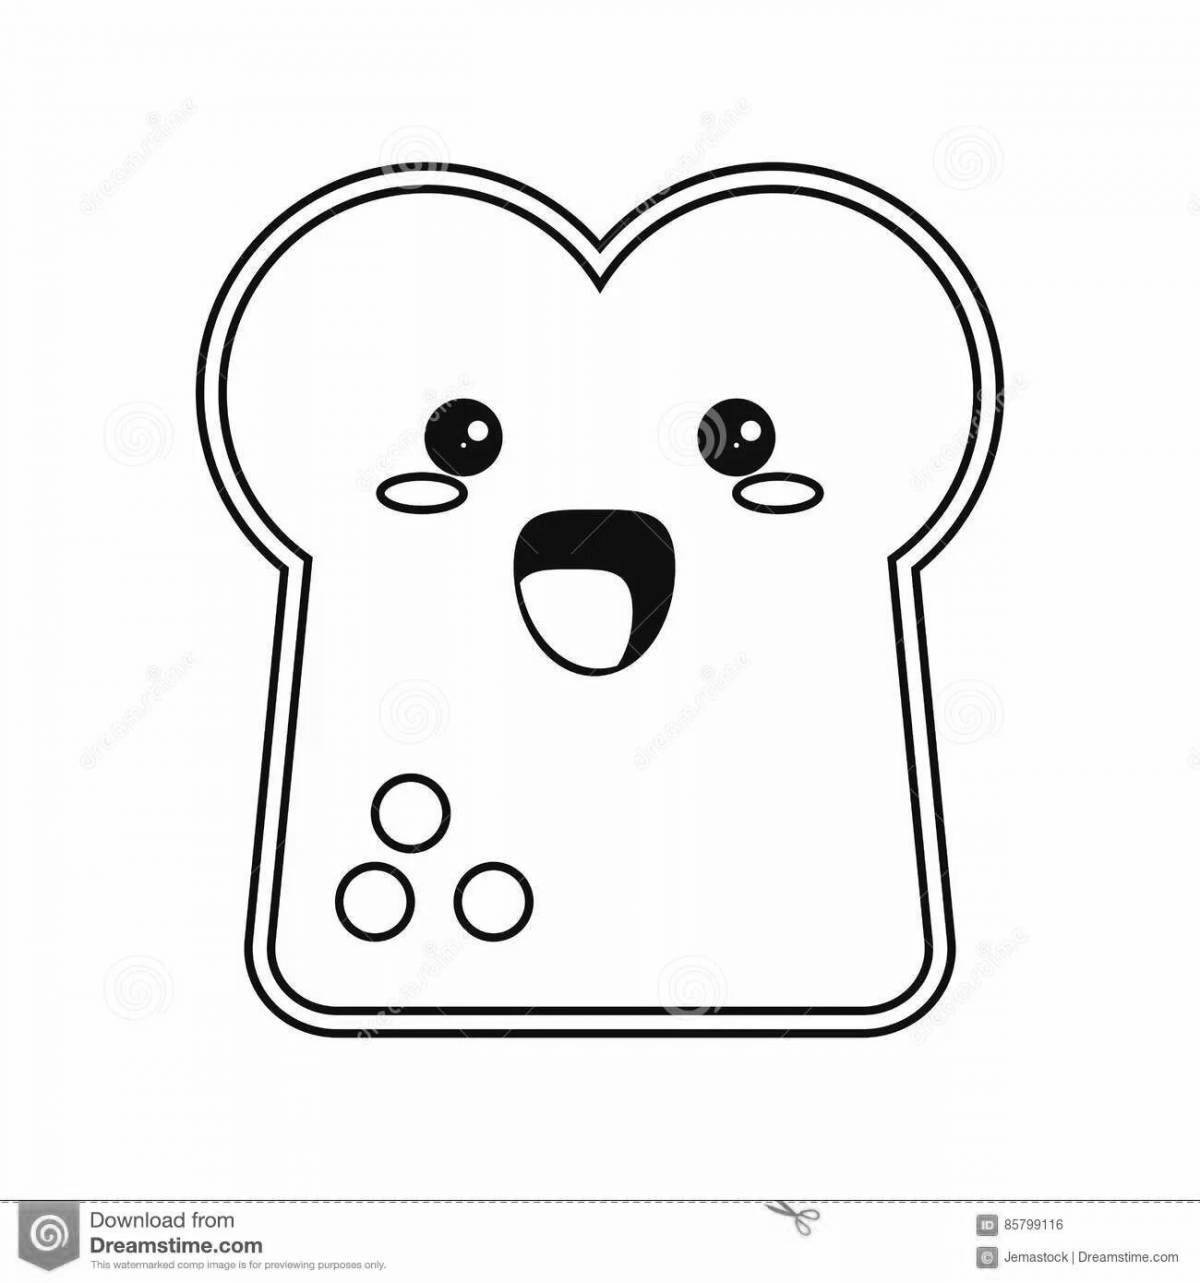 Living toast coloring page